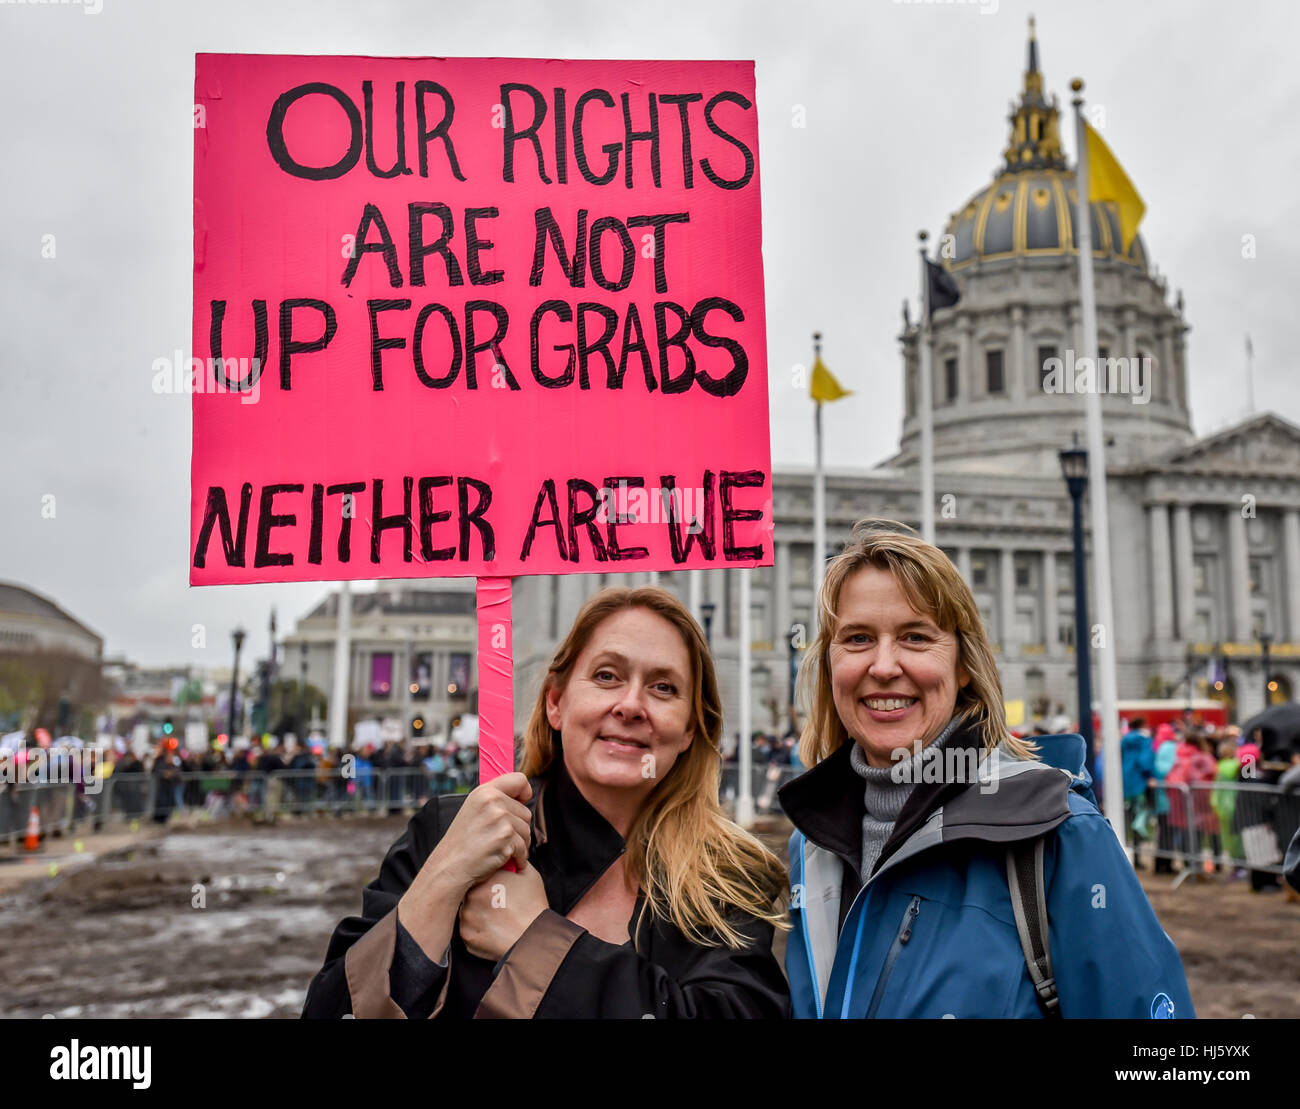 San Francisco, California, USA. 21st January, 2017. Two women hold sign in front of San Francisco Cit Hall that, 'Our rights are not up for grabs. Neither are we,' before San Francisco Women's March 2017. Credit: Shelly Rivoli/Alamy Live News Stock Photo